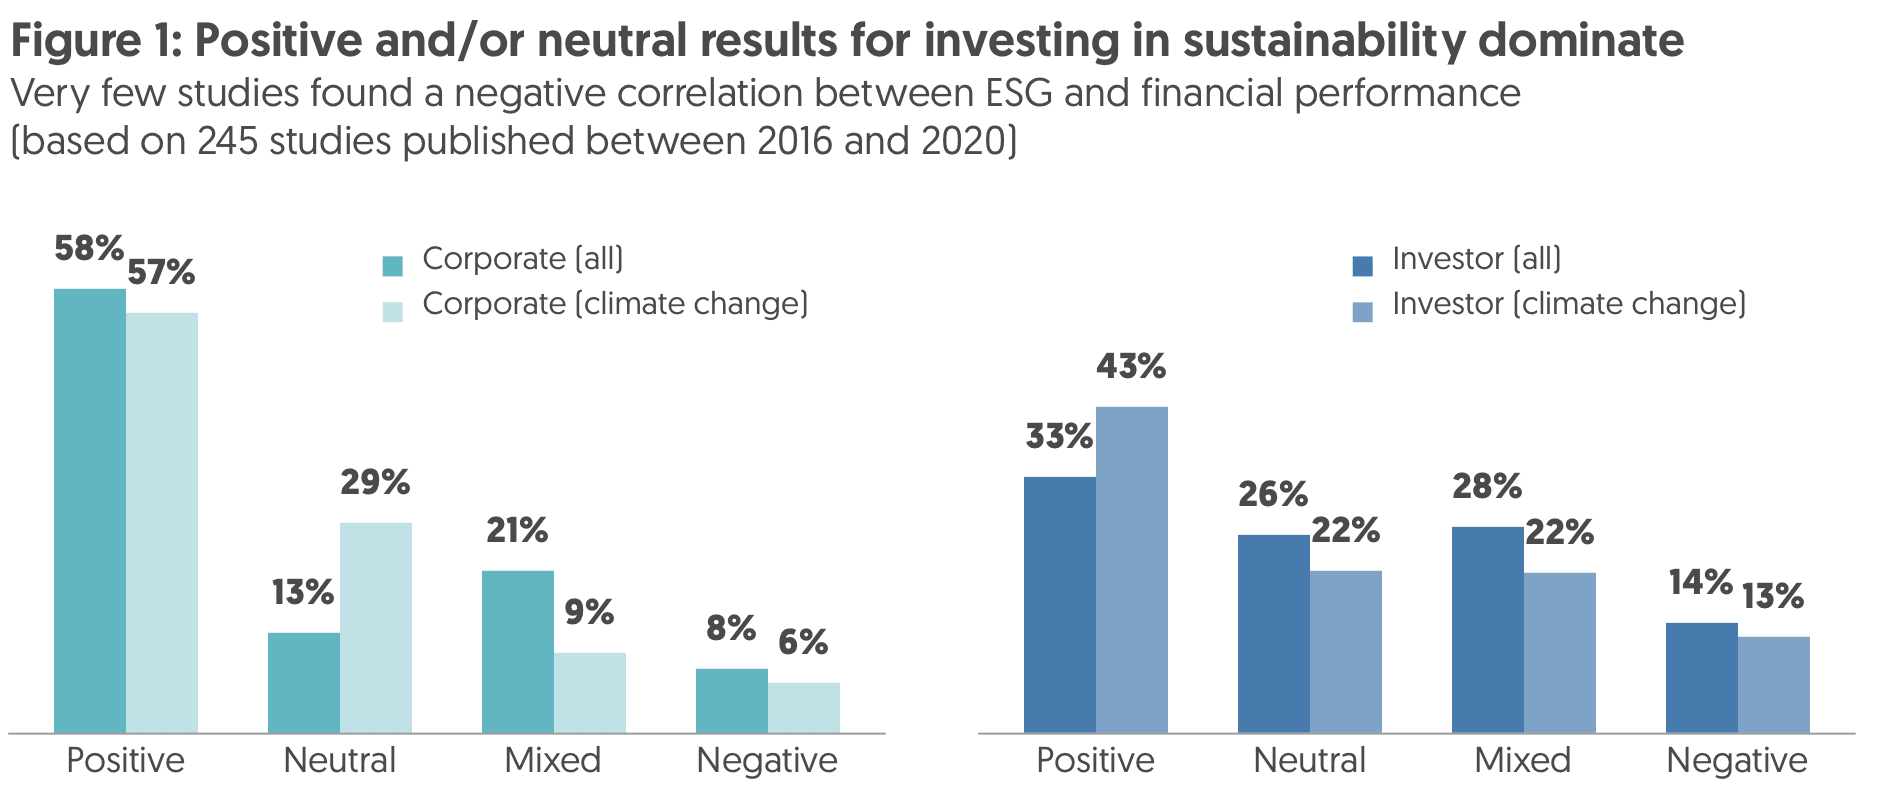 Figure 1: Positive and/or neutral results for investing in sustainability dominate